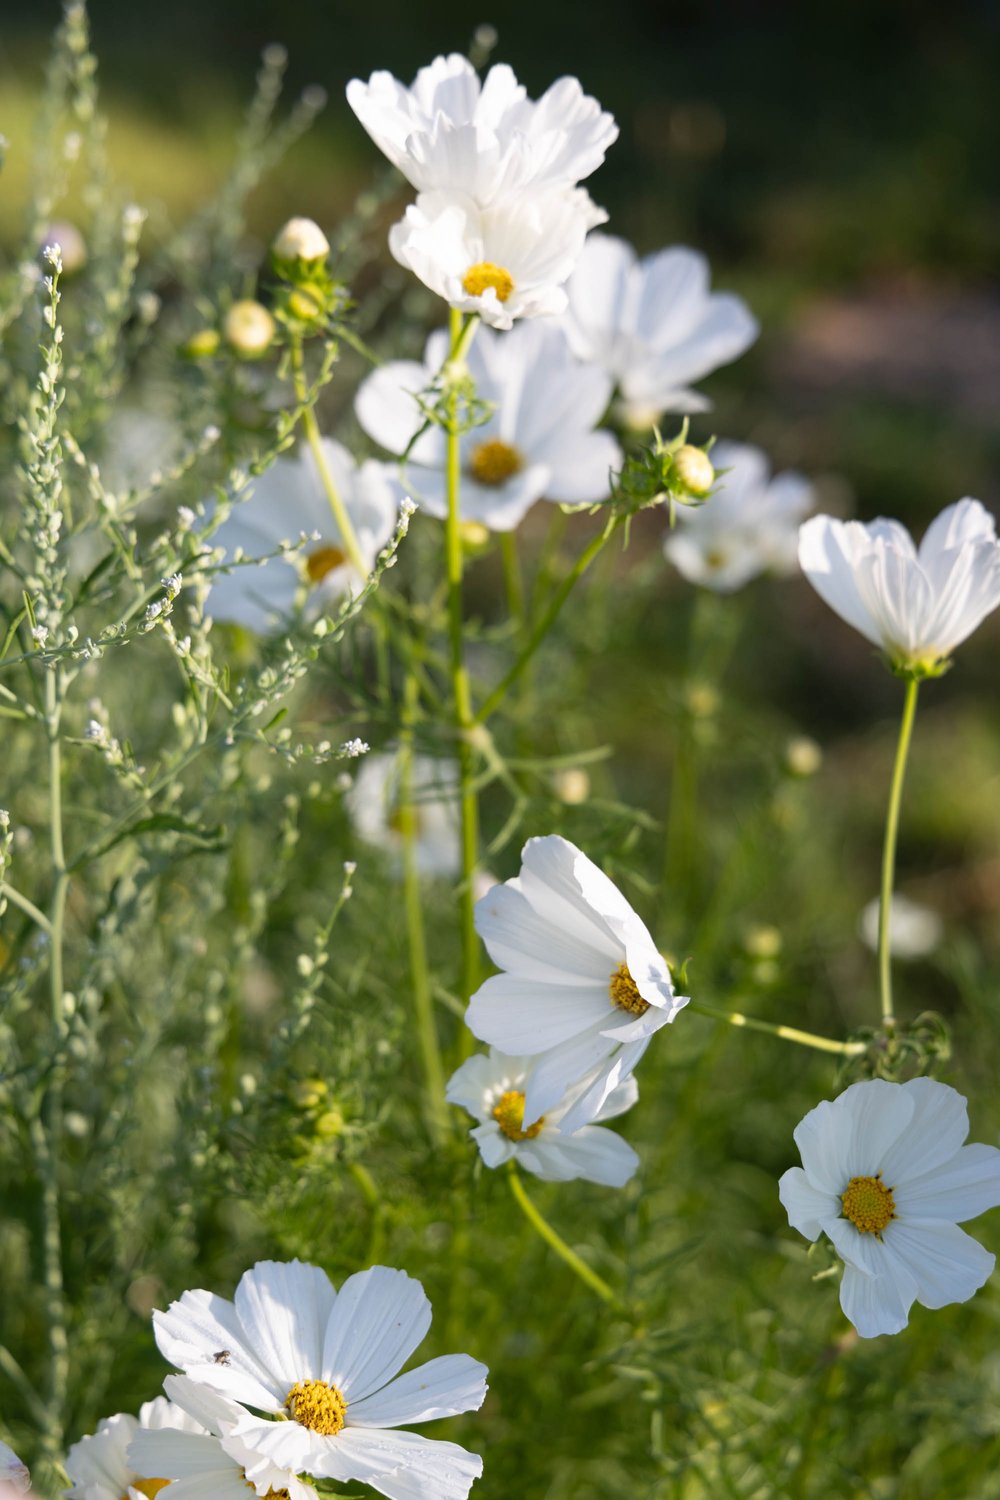 Best Large White Cosmos Seeds grows large pure white cosmos for easy cut flower garden seed16.jpg